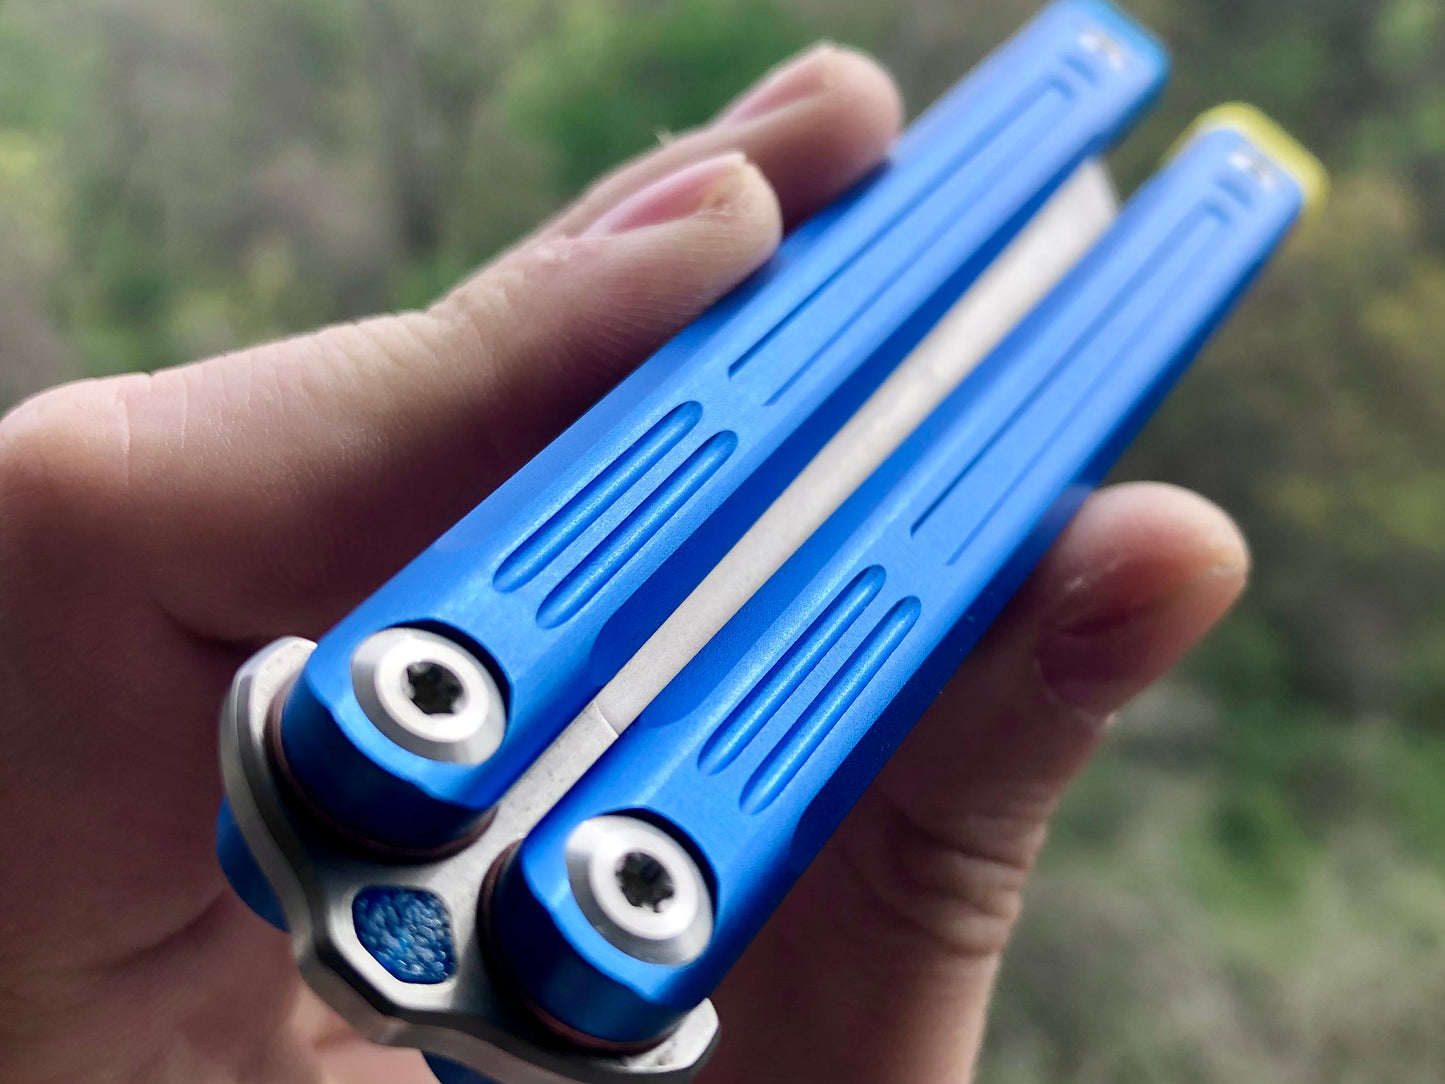 Adjust the balance, extend the handles, and add grip to your LDY balisong Cygnus and Orion flippers with Zippy extension spacers and handle inlays.